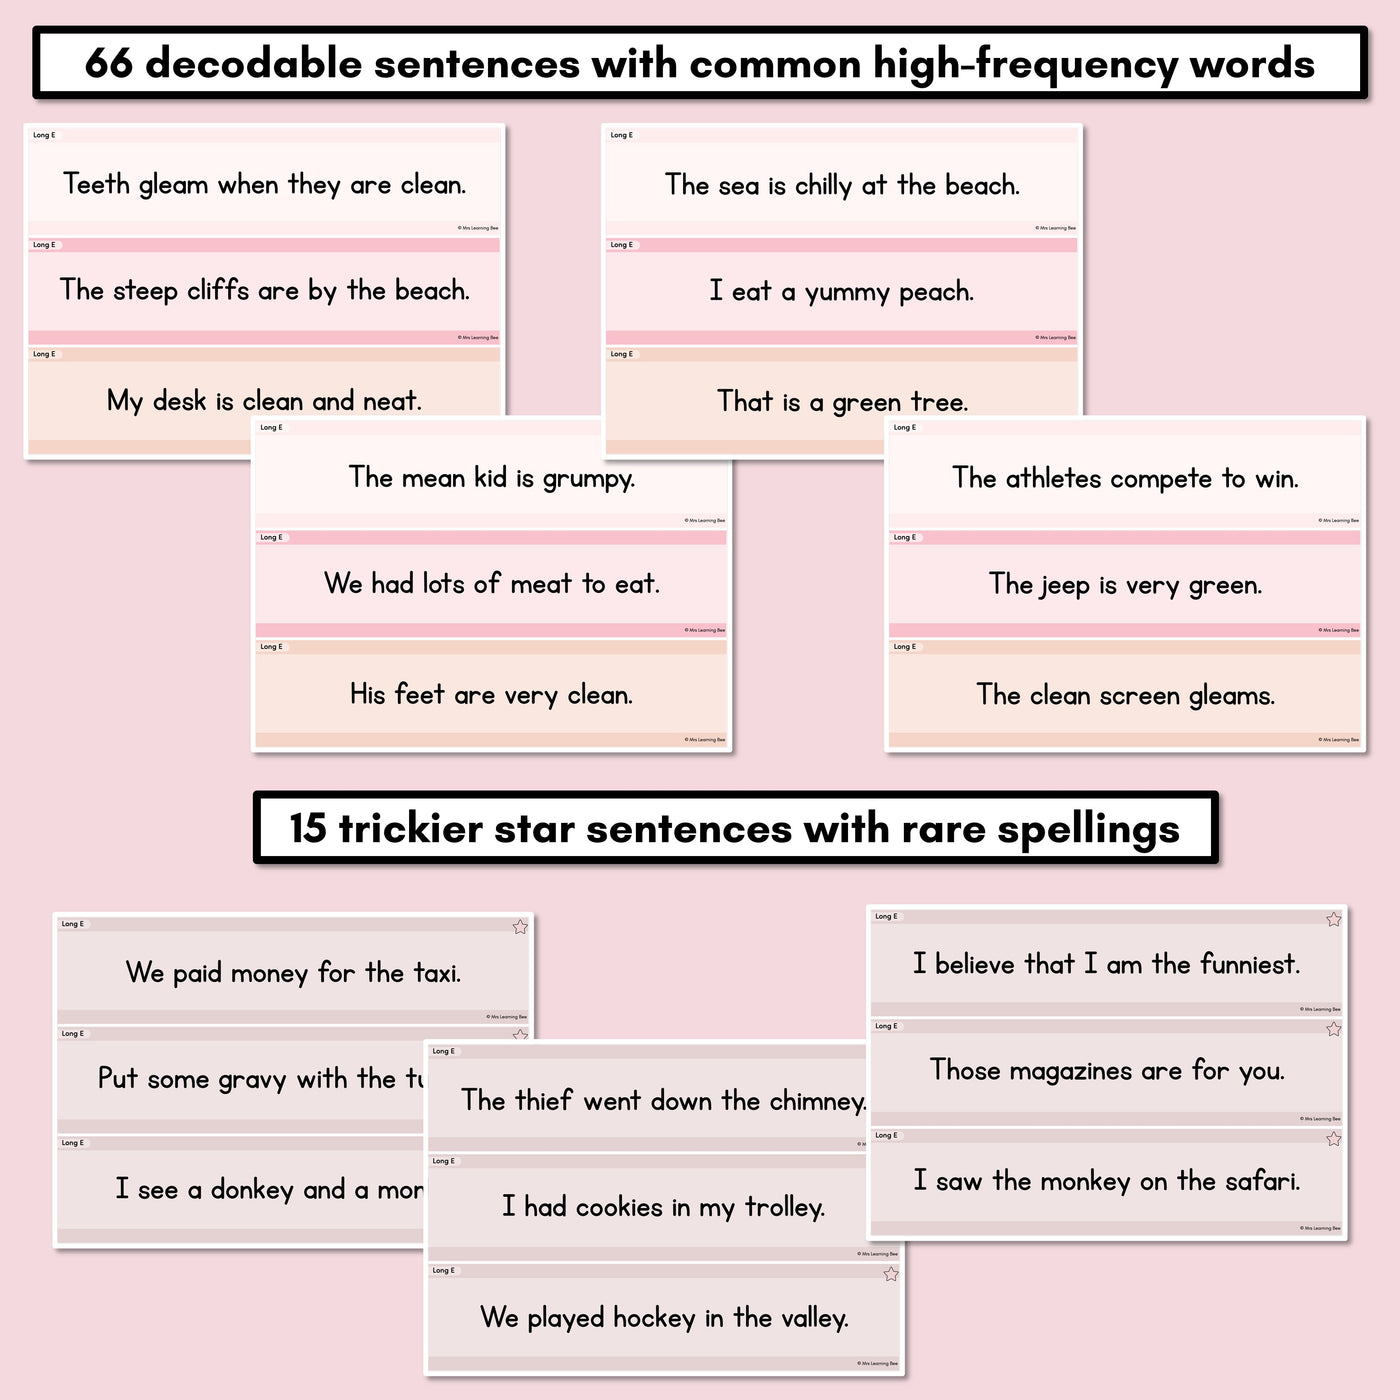 Neutral Long Vowel E Decodable Words and Sentence Cards - FREE